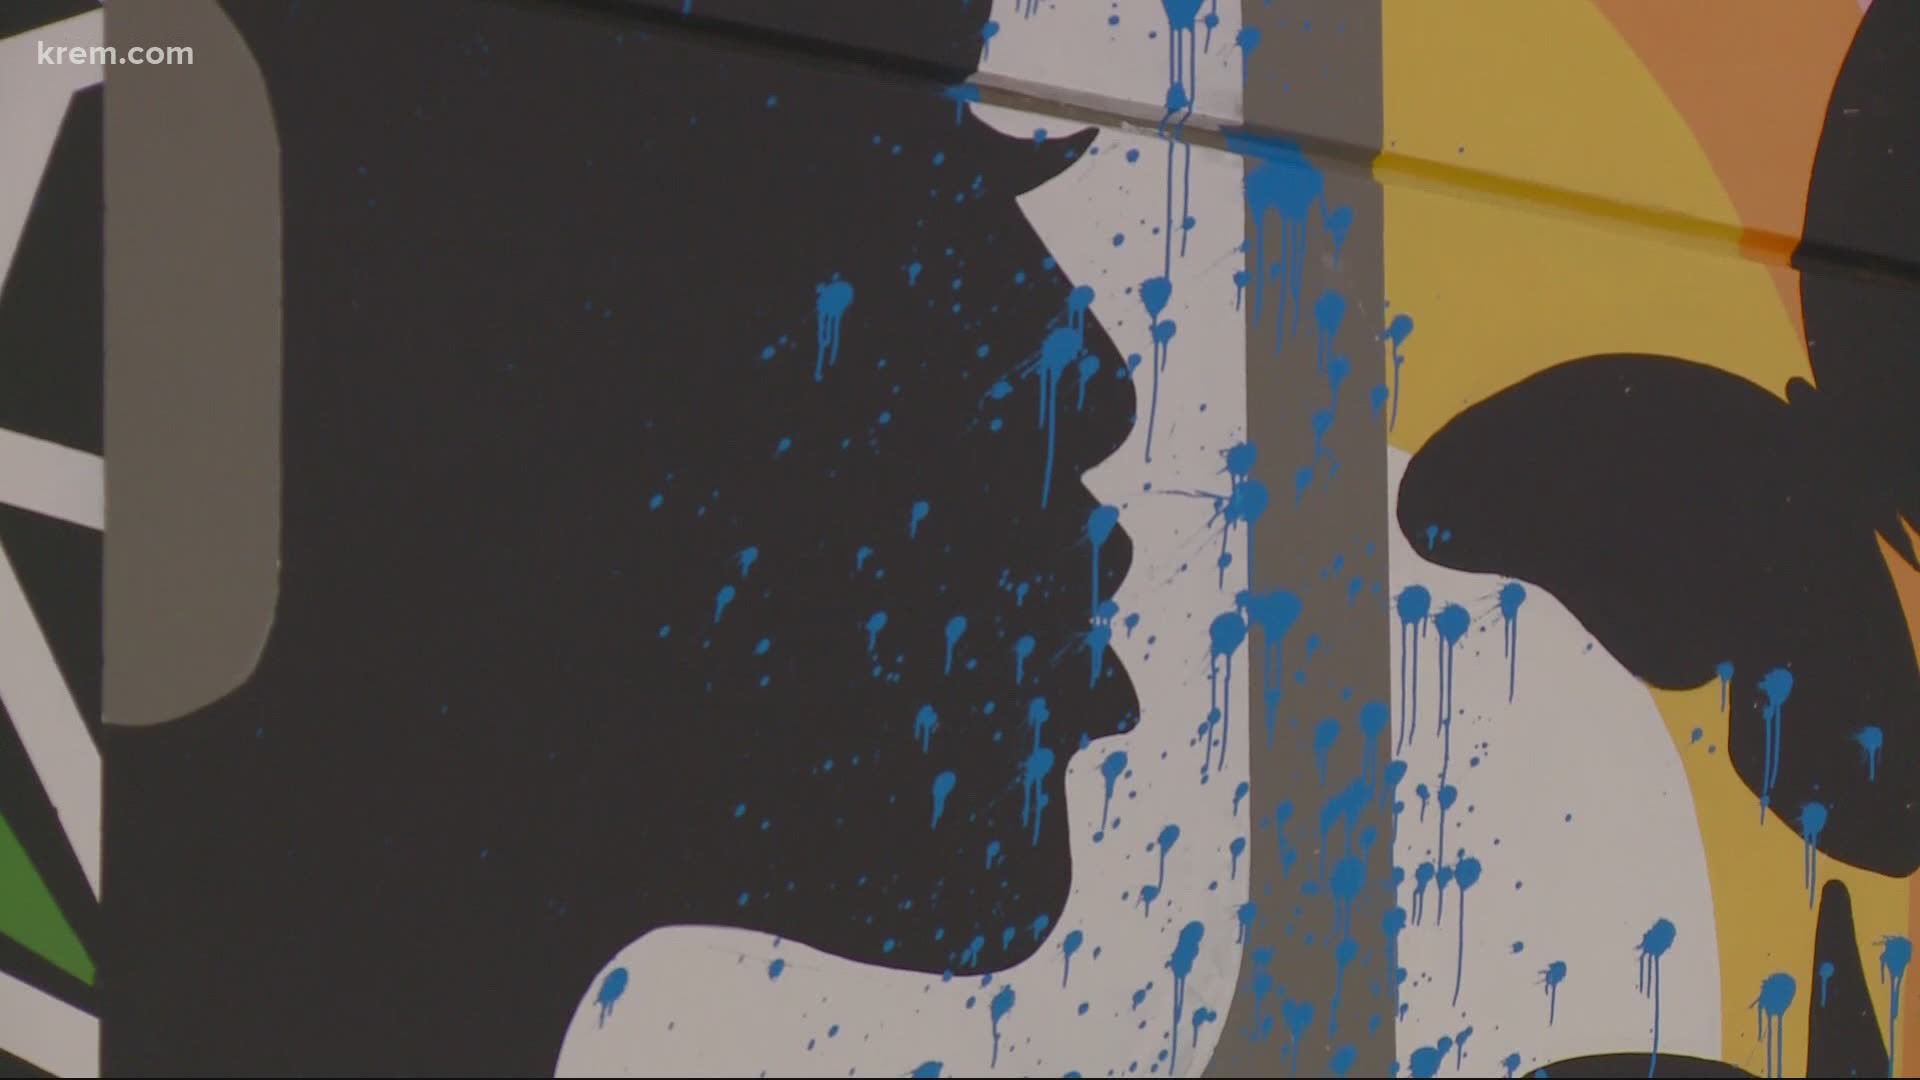 It appears someone threw three different colors of paint on the mural. Spokane police said a police report had not been filed.